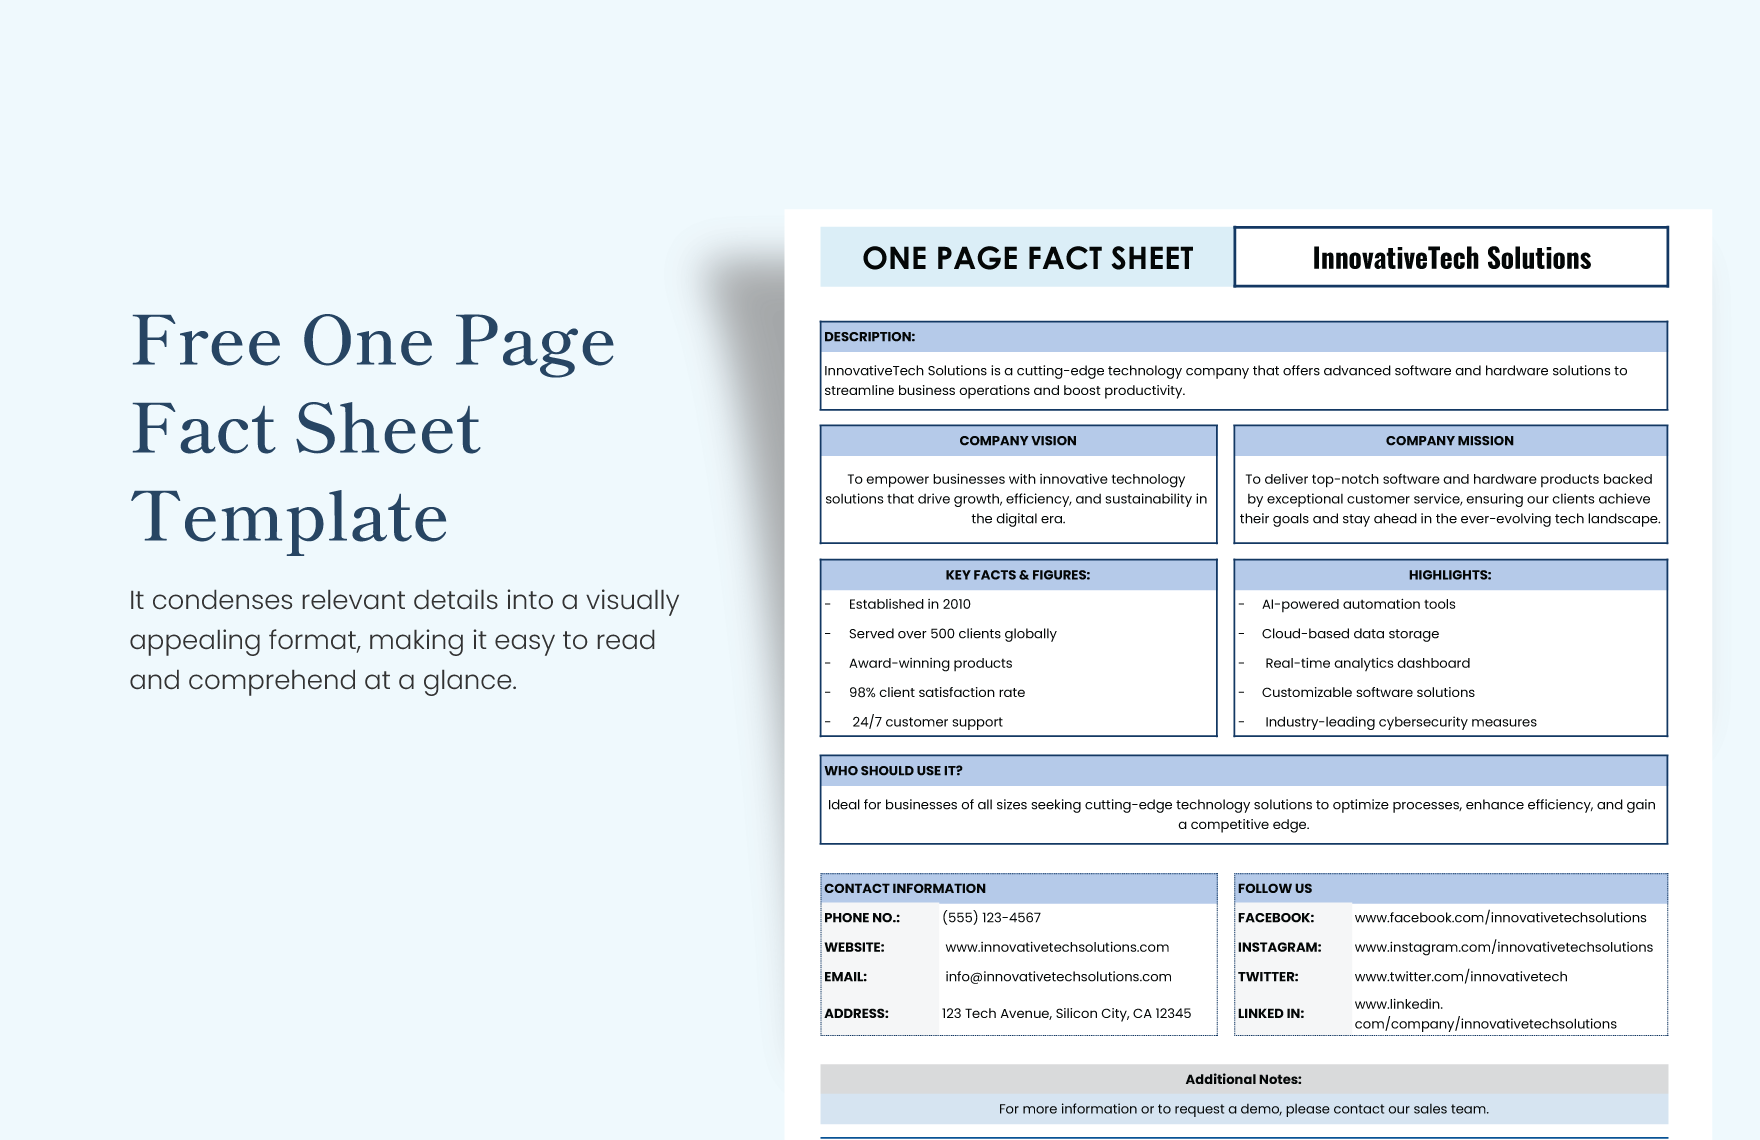 Free One Page Fact Sheet Template in Excel, Google Sheets